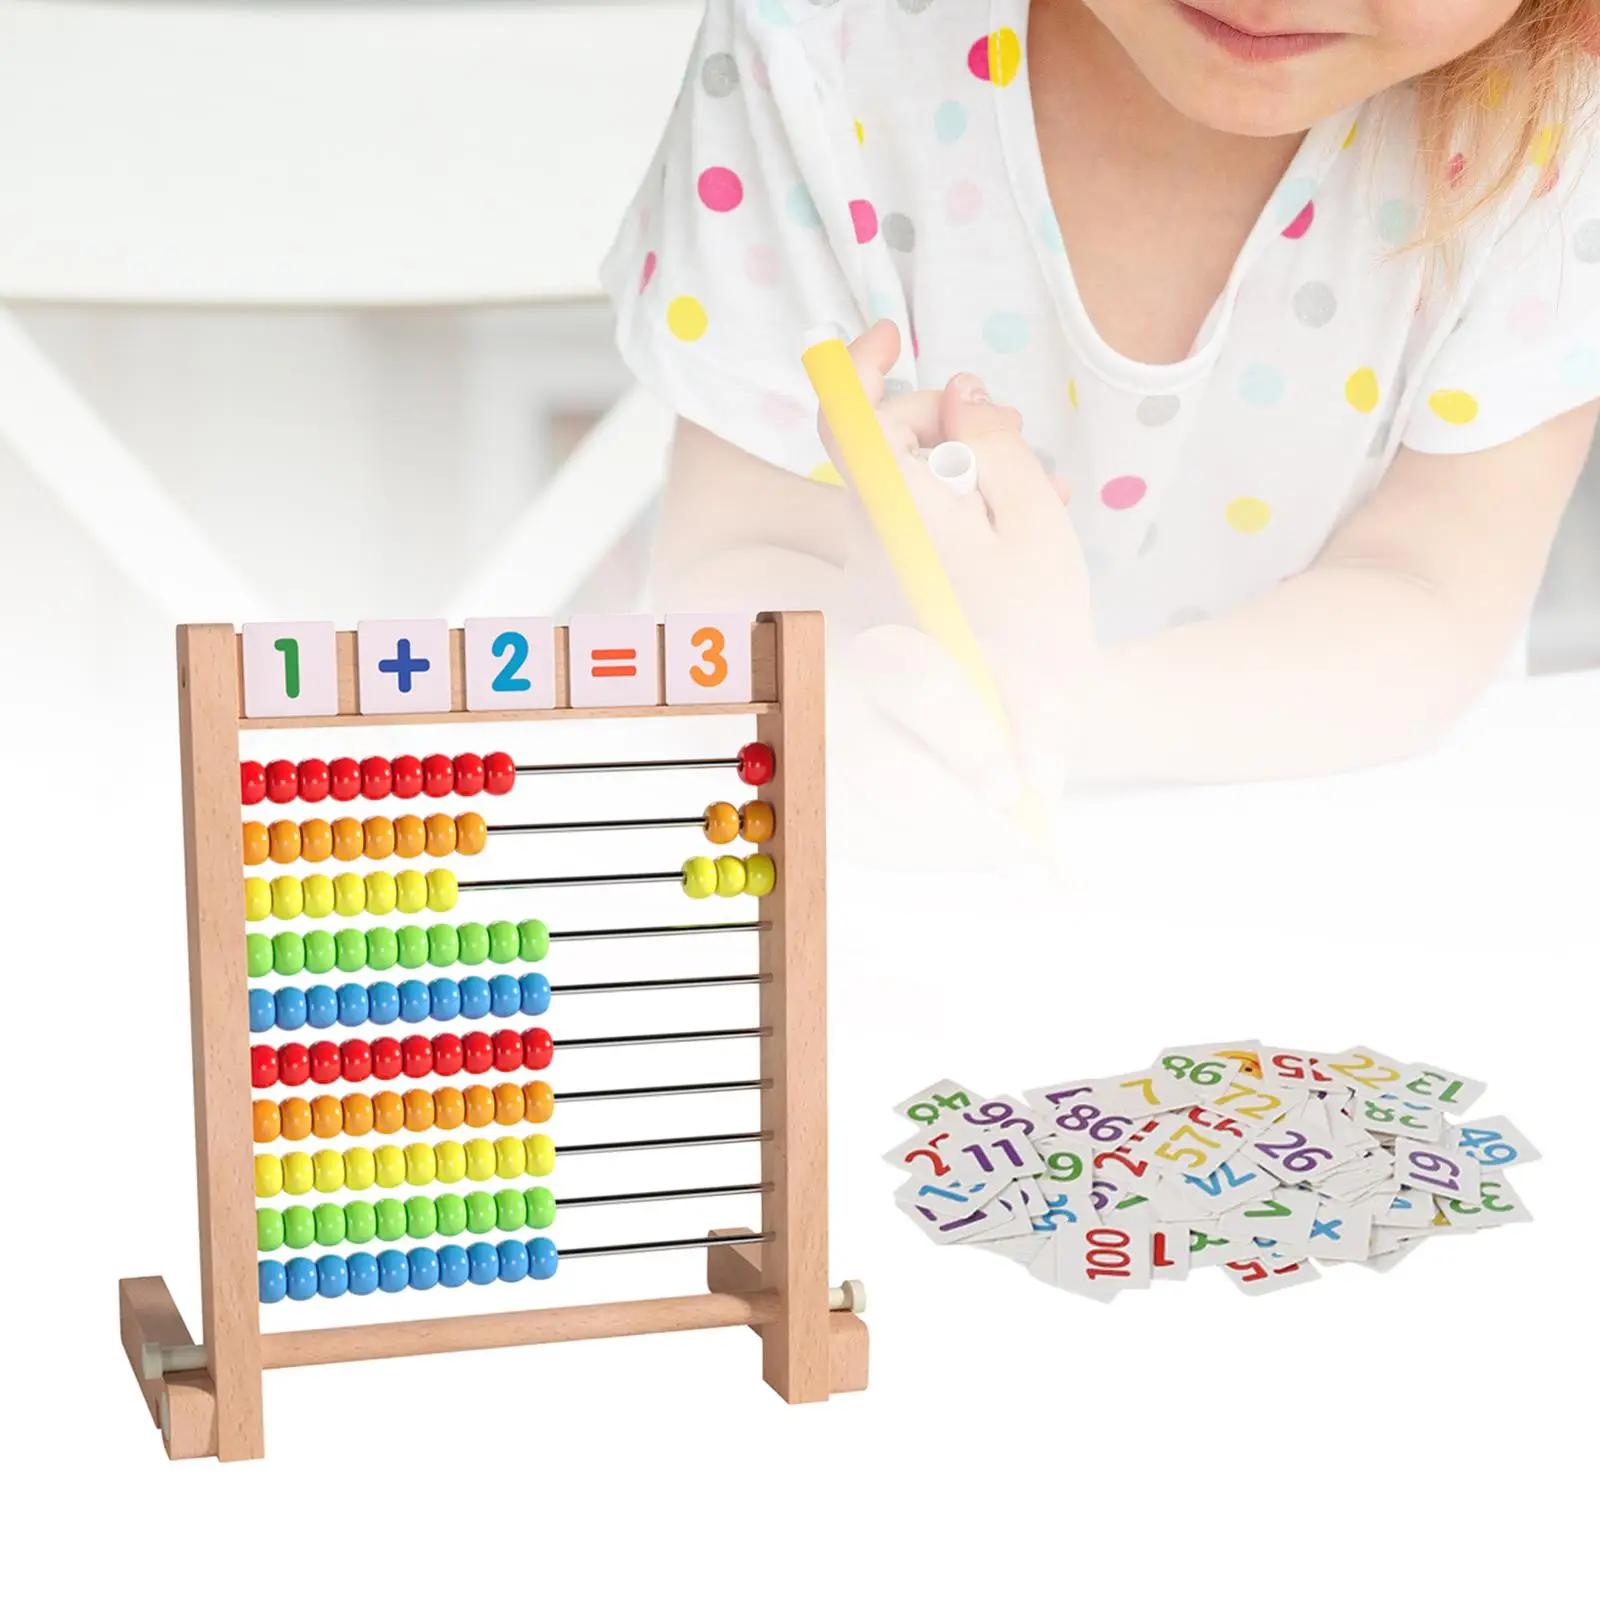 Classic Wooden Abacus Ten Frame Set Calculating Beads Toys Educational Counting Toy for Boy Girls Kids Toddlers Gifts Learning